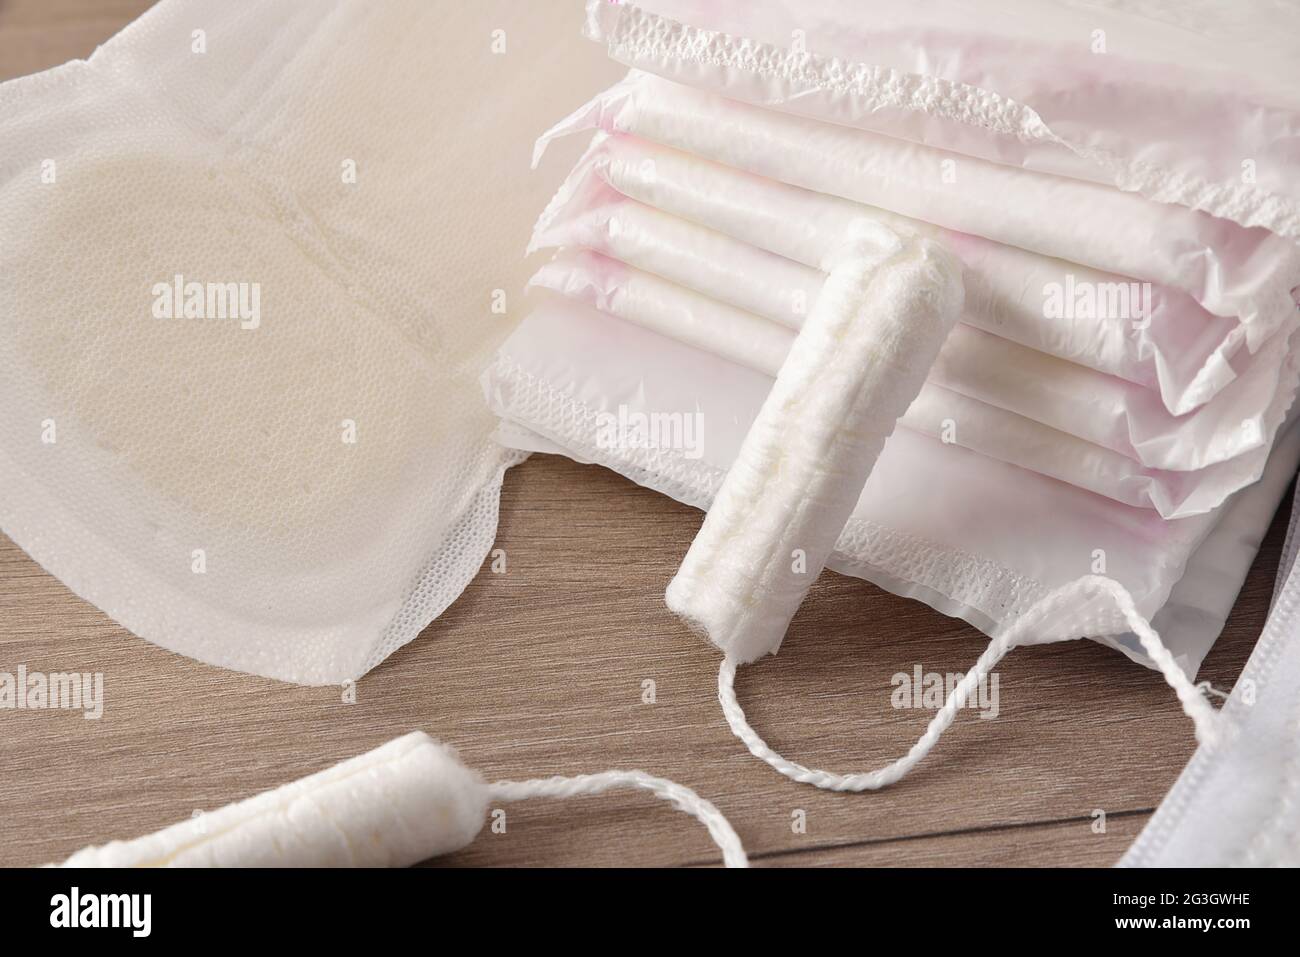 Absorbent menstrual pads and tampons. Napkin and tampon on wooden table.  Elevated view. Horizontal composition Stock Photo - Alamy